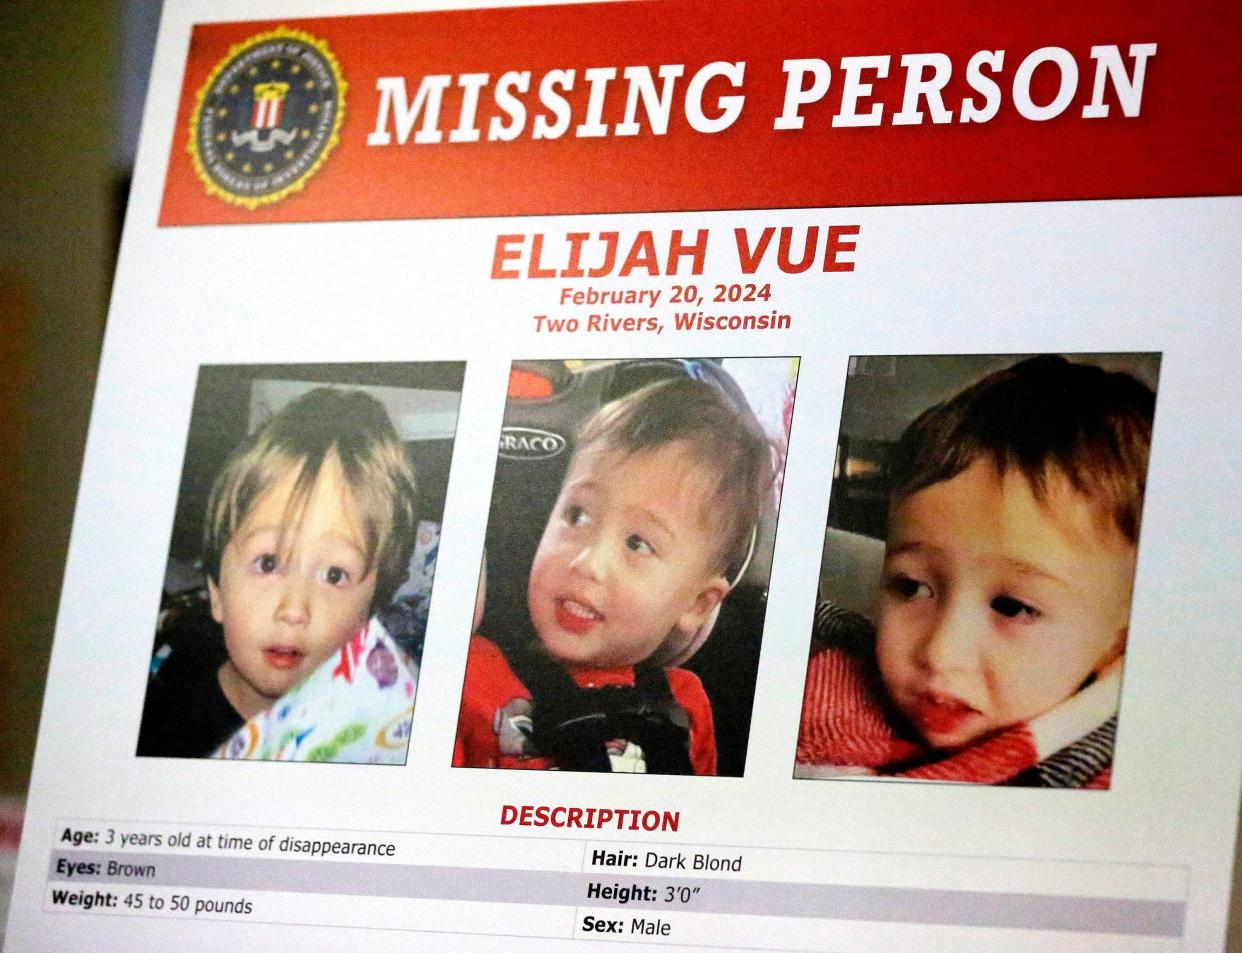 A missing person poster was on display at the press conference held at the Two Rivers city hall to help find three-year-old Elijah Vue, Tuesday, February 27, 2024, in Two Rivers, Wis.